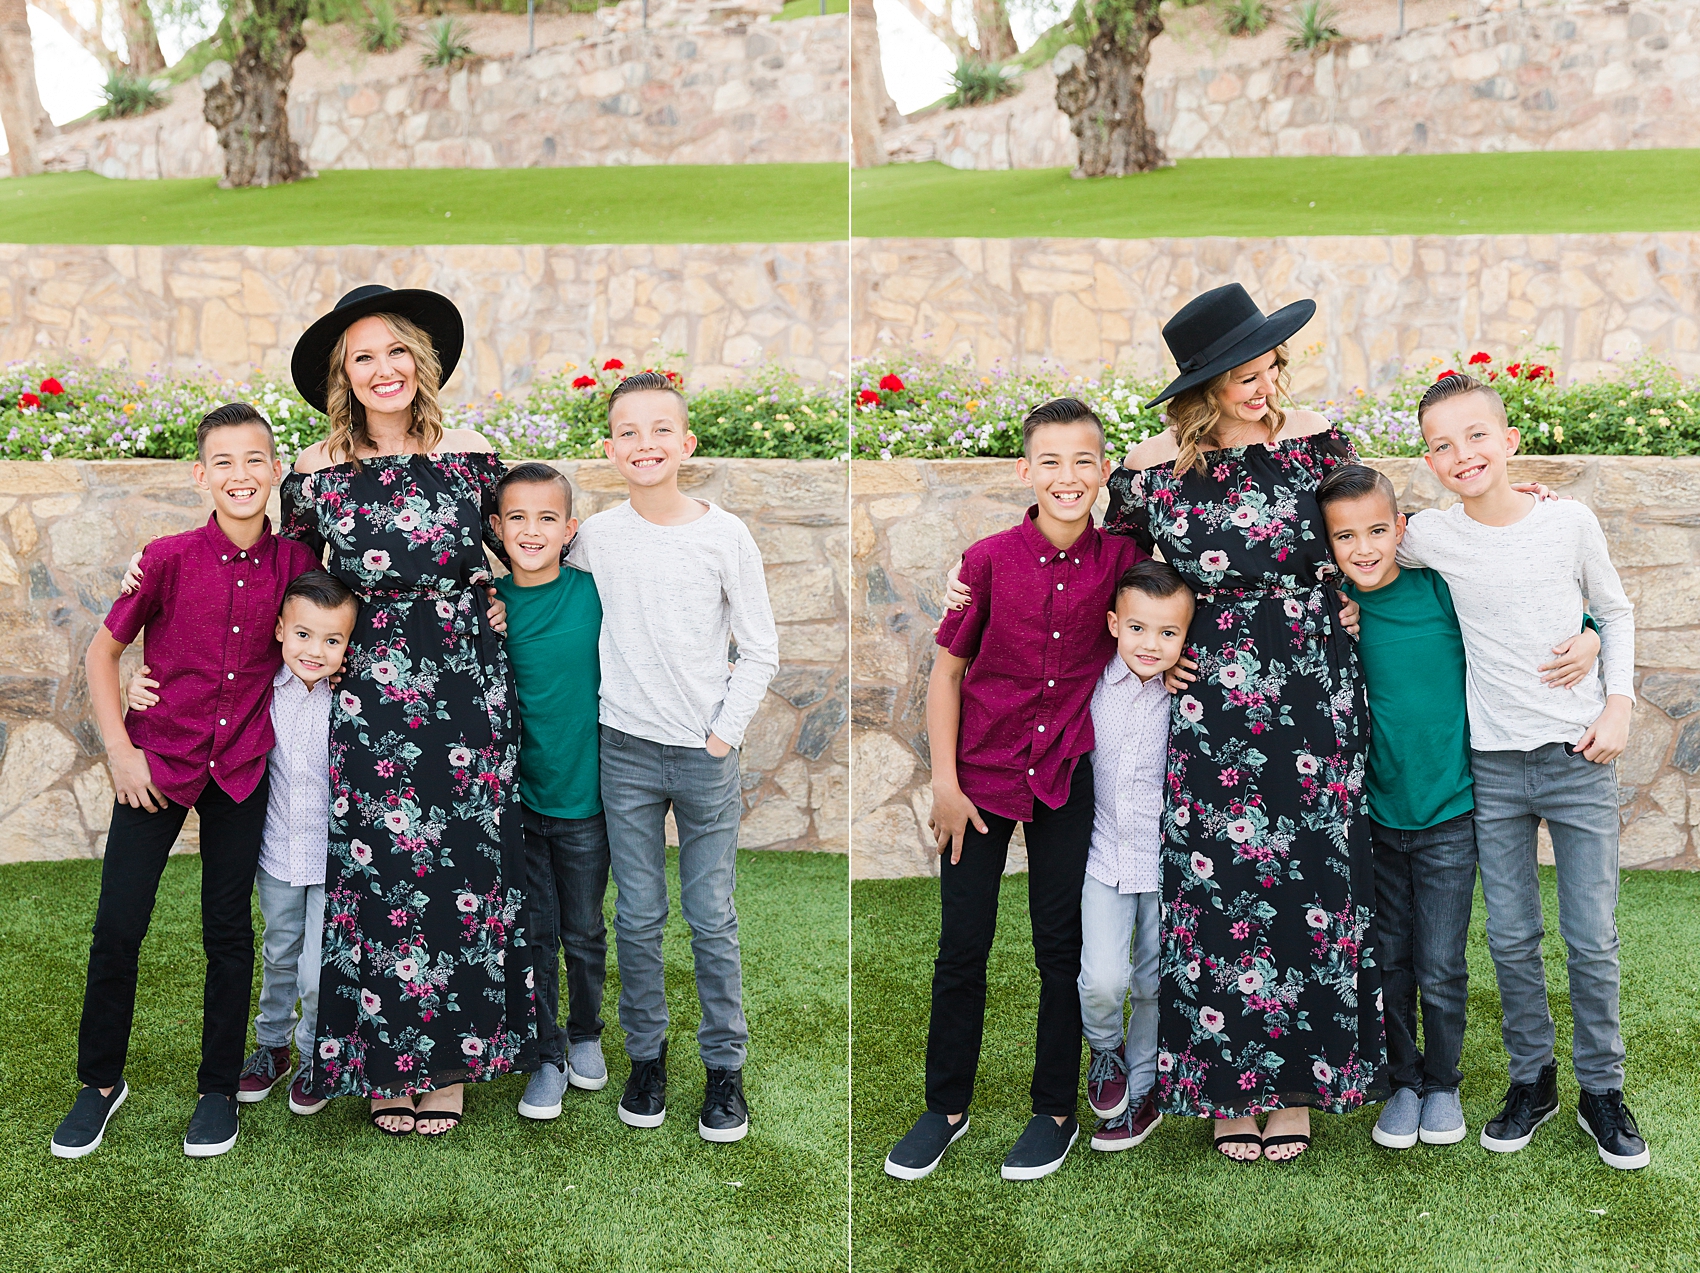 Leah Hope Photography | Scottsdale Phoenix Arizona | Wrigley Mansion | Mediterranean Architecture | Family Pictures | What to Wear | Family Poses | Child Photos